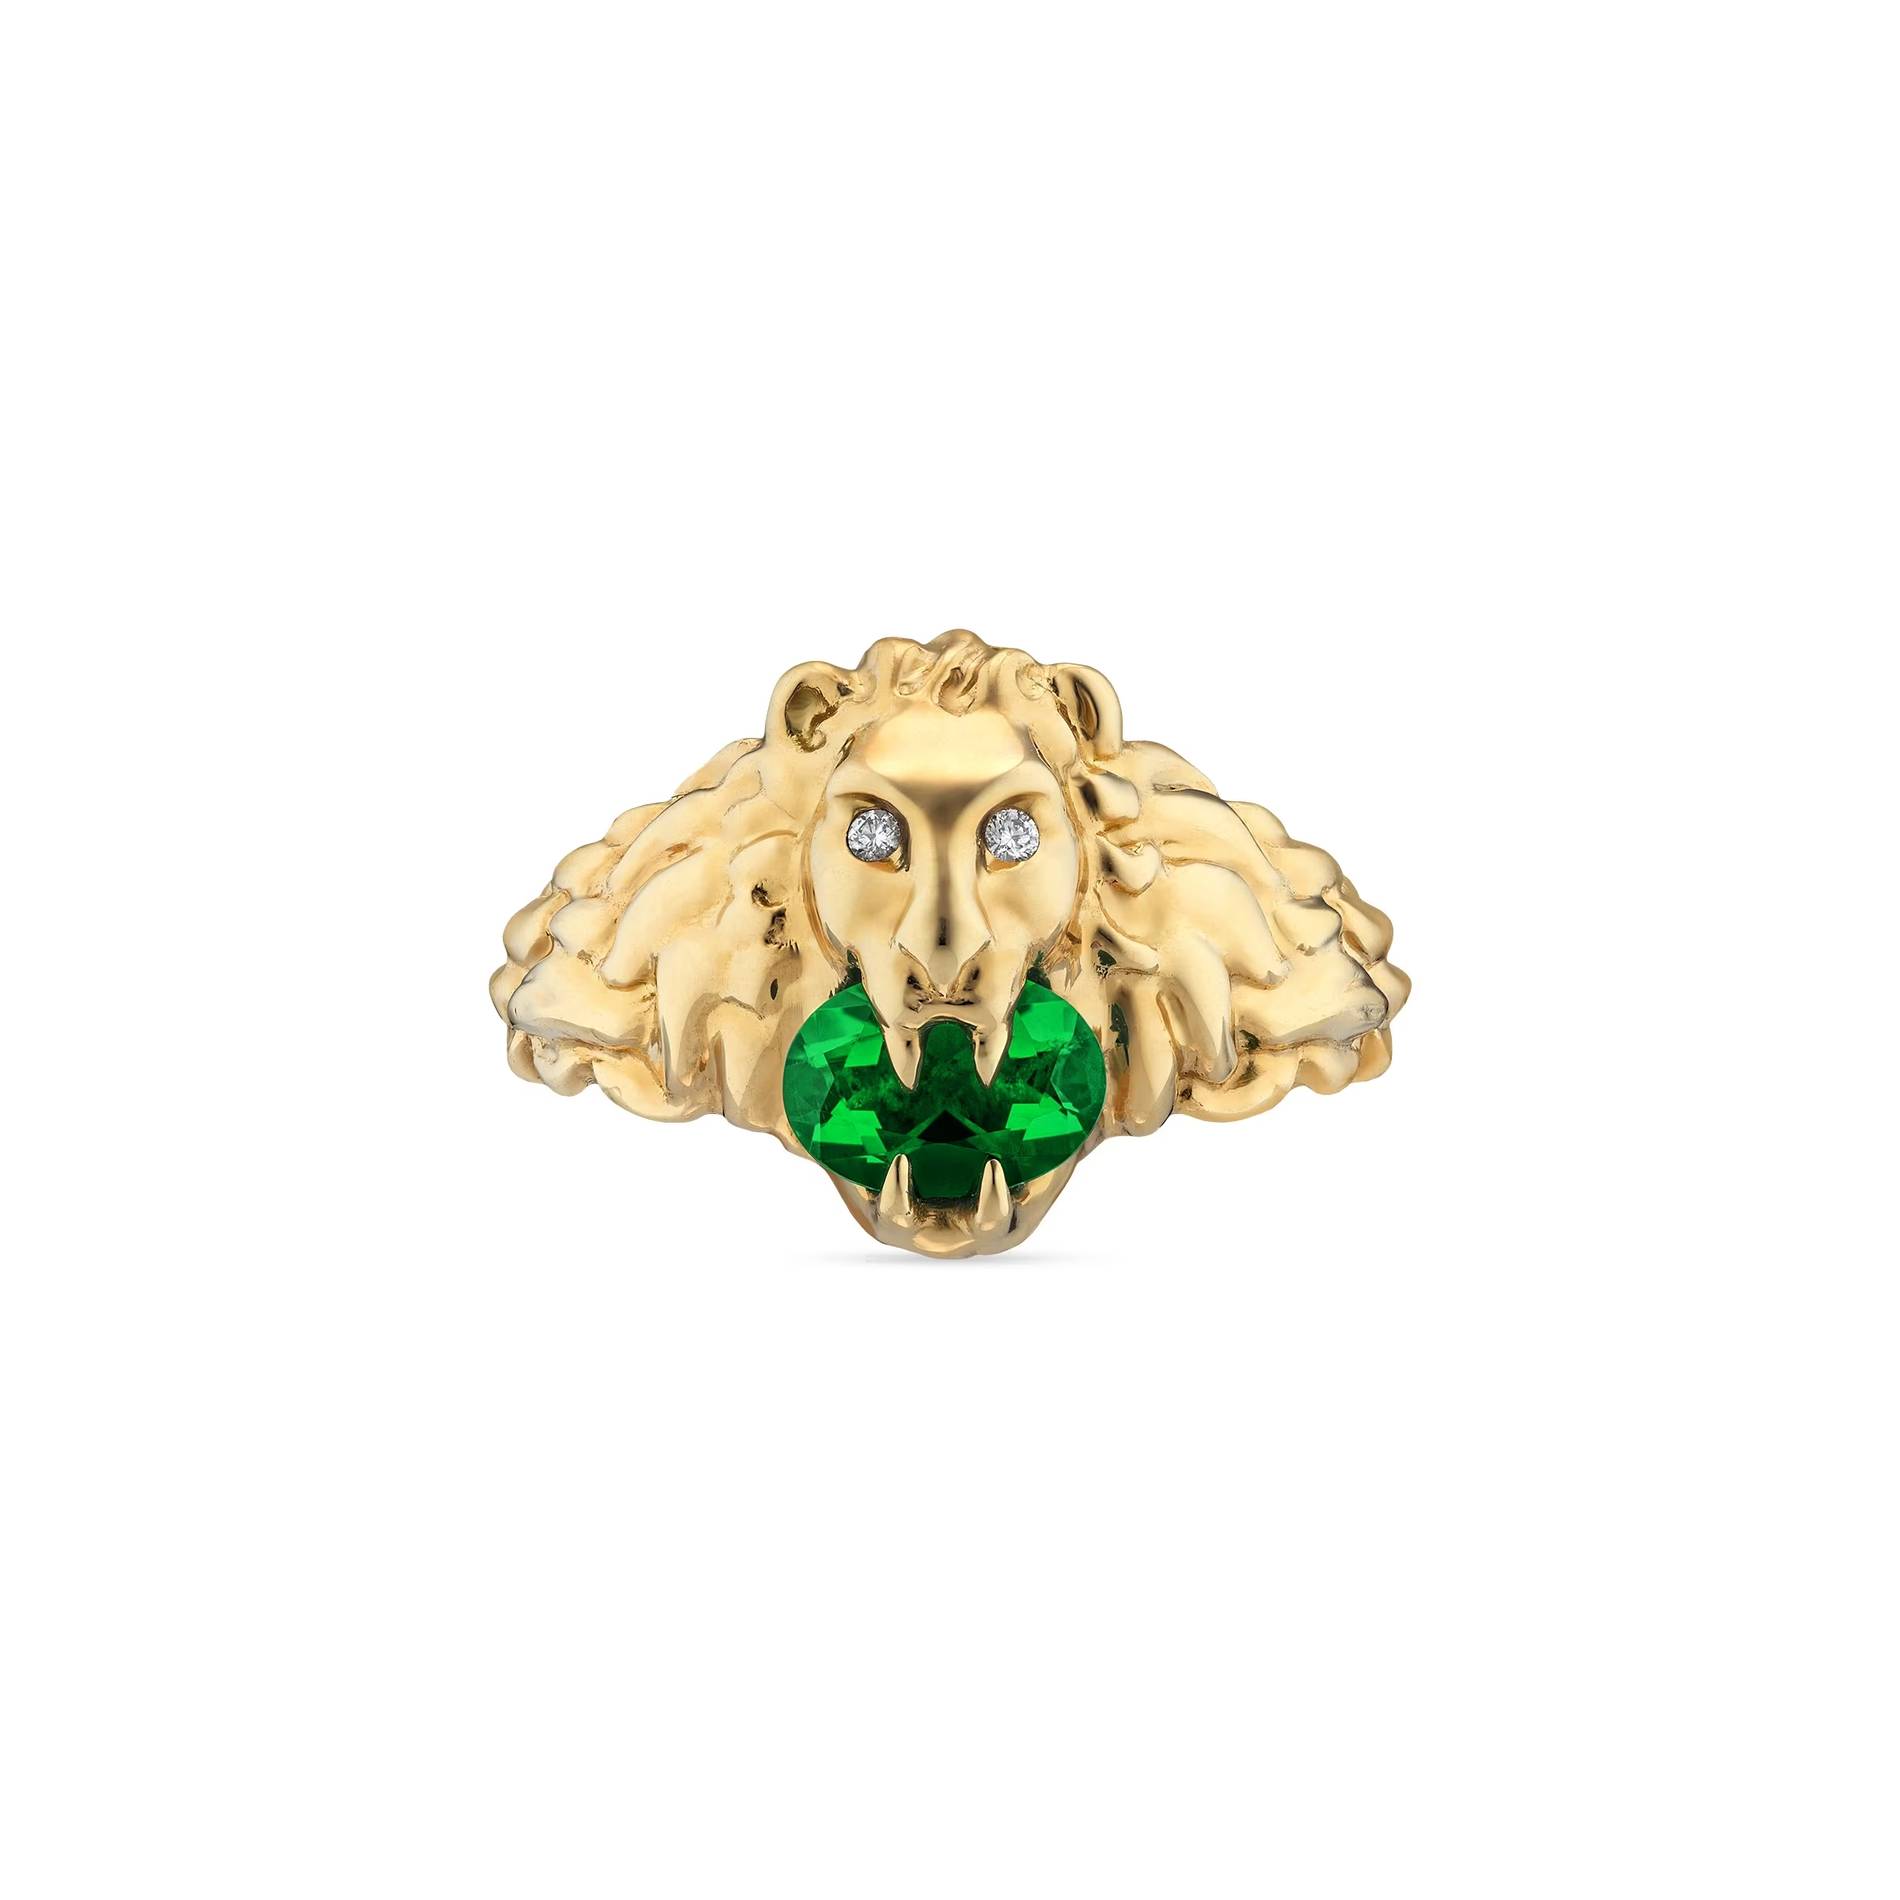 gift-guide-jewelry-gucci-lion-head-ring.jpg